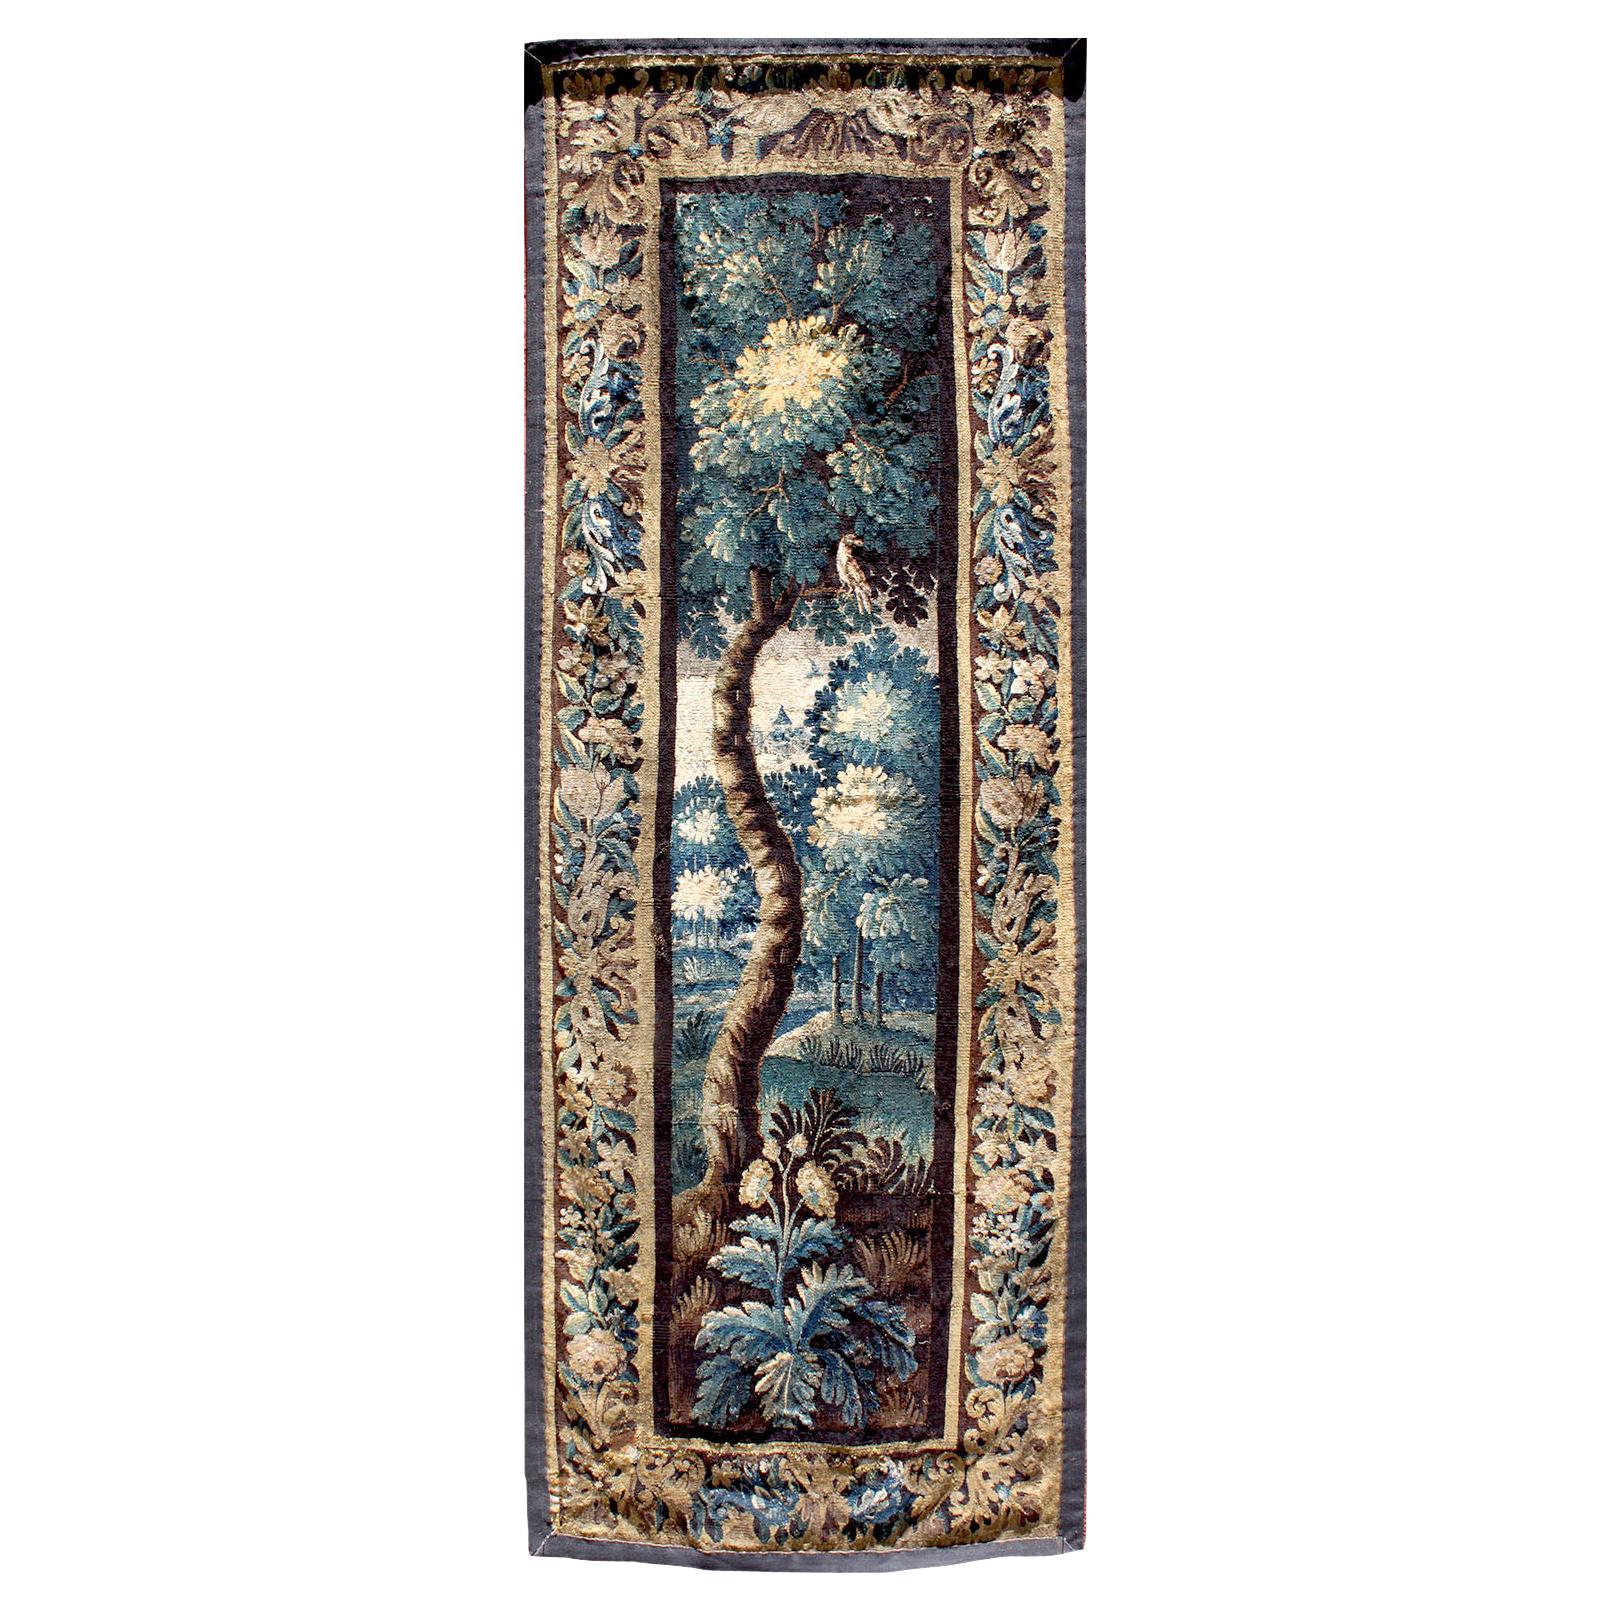 Flemish 18th-19th Century Verdure Landscape Tapestry Panel Centered with a Tree For Sale